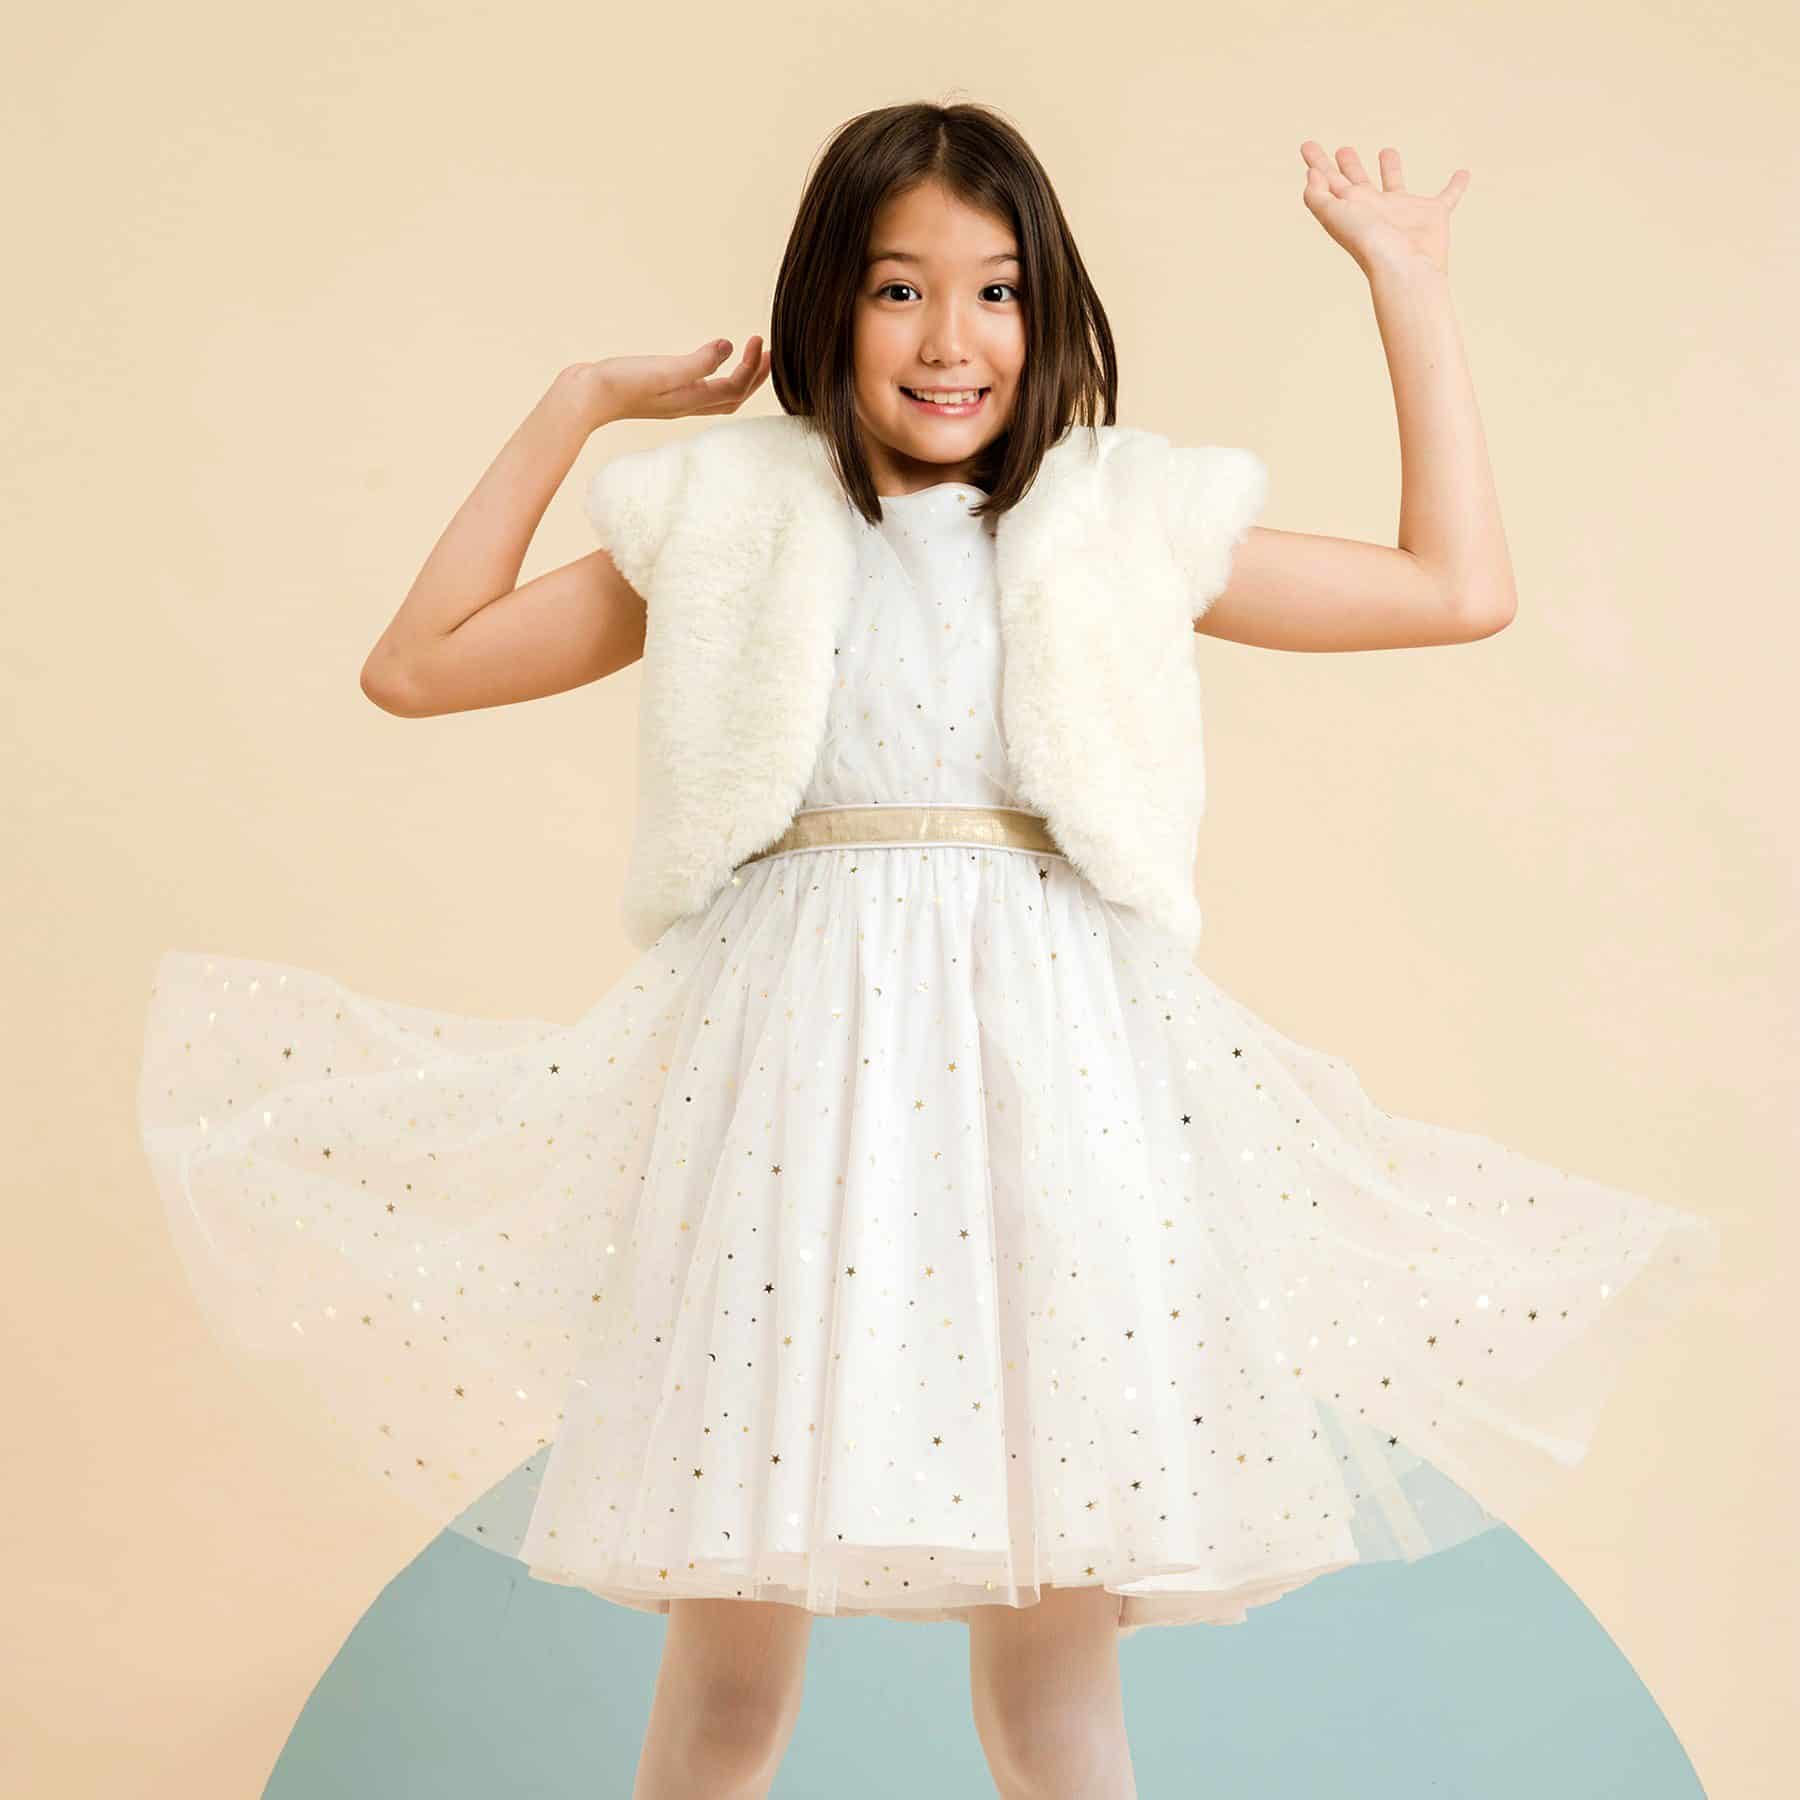 Short-sleeved jacket in beige faux fur for girls and young women from the children's fashion brand La Faute à Voltaire